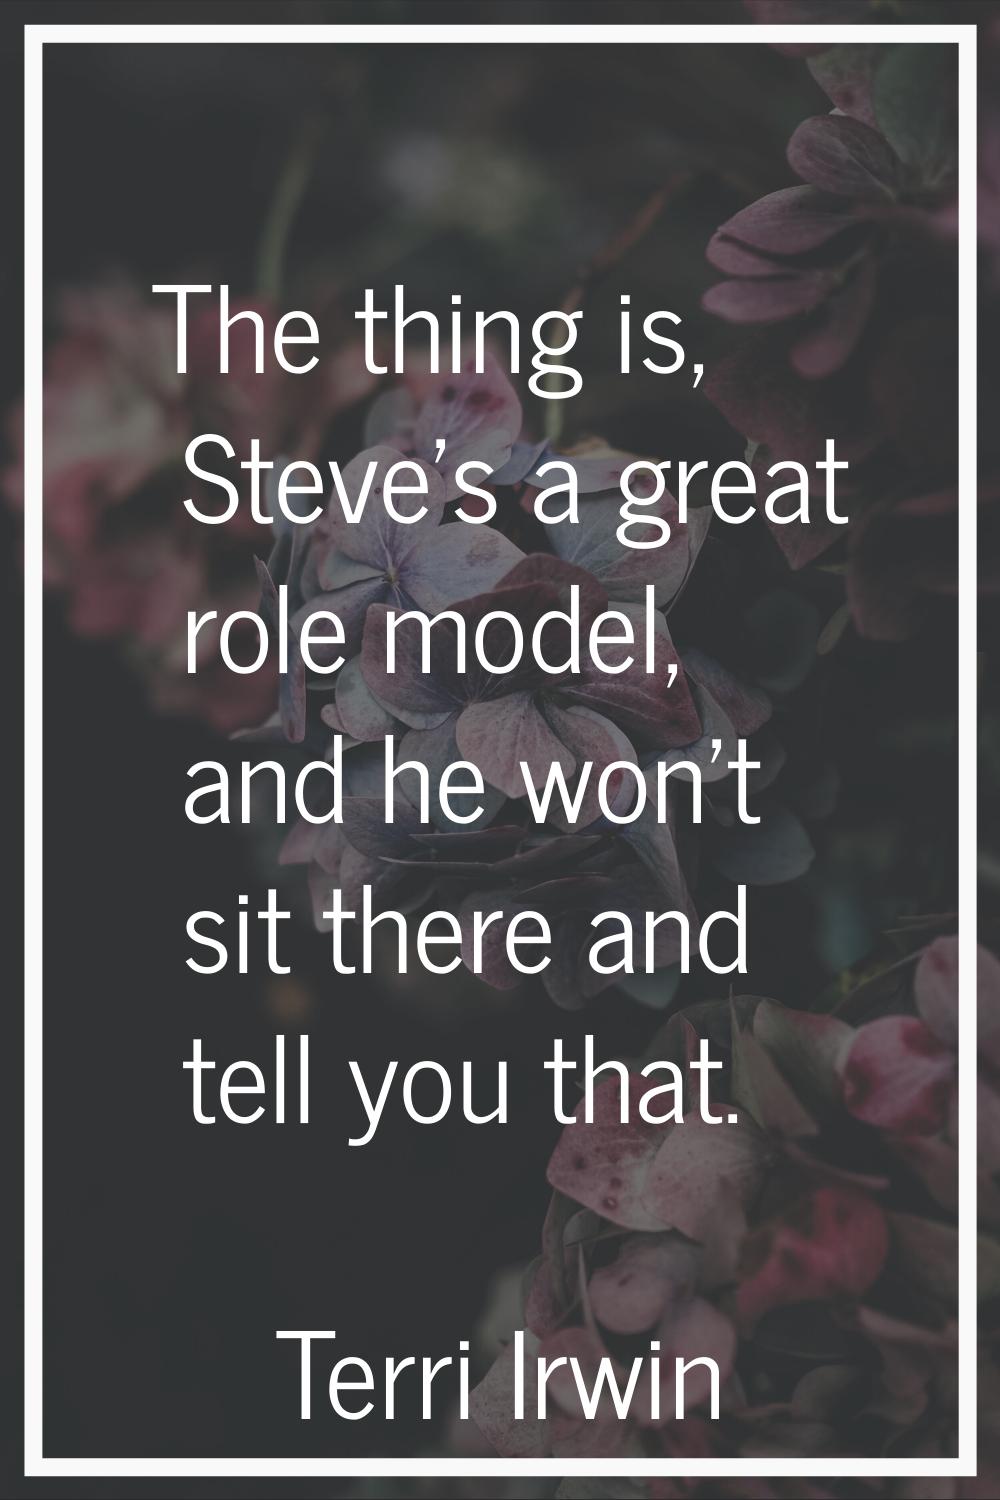 The thing is, Steve's a great role model, and he won't sit there and tell you that.